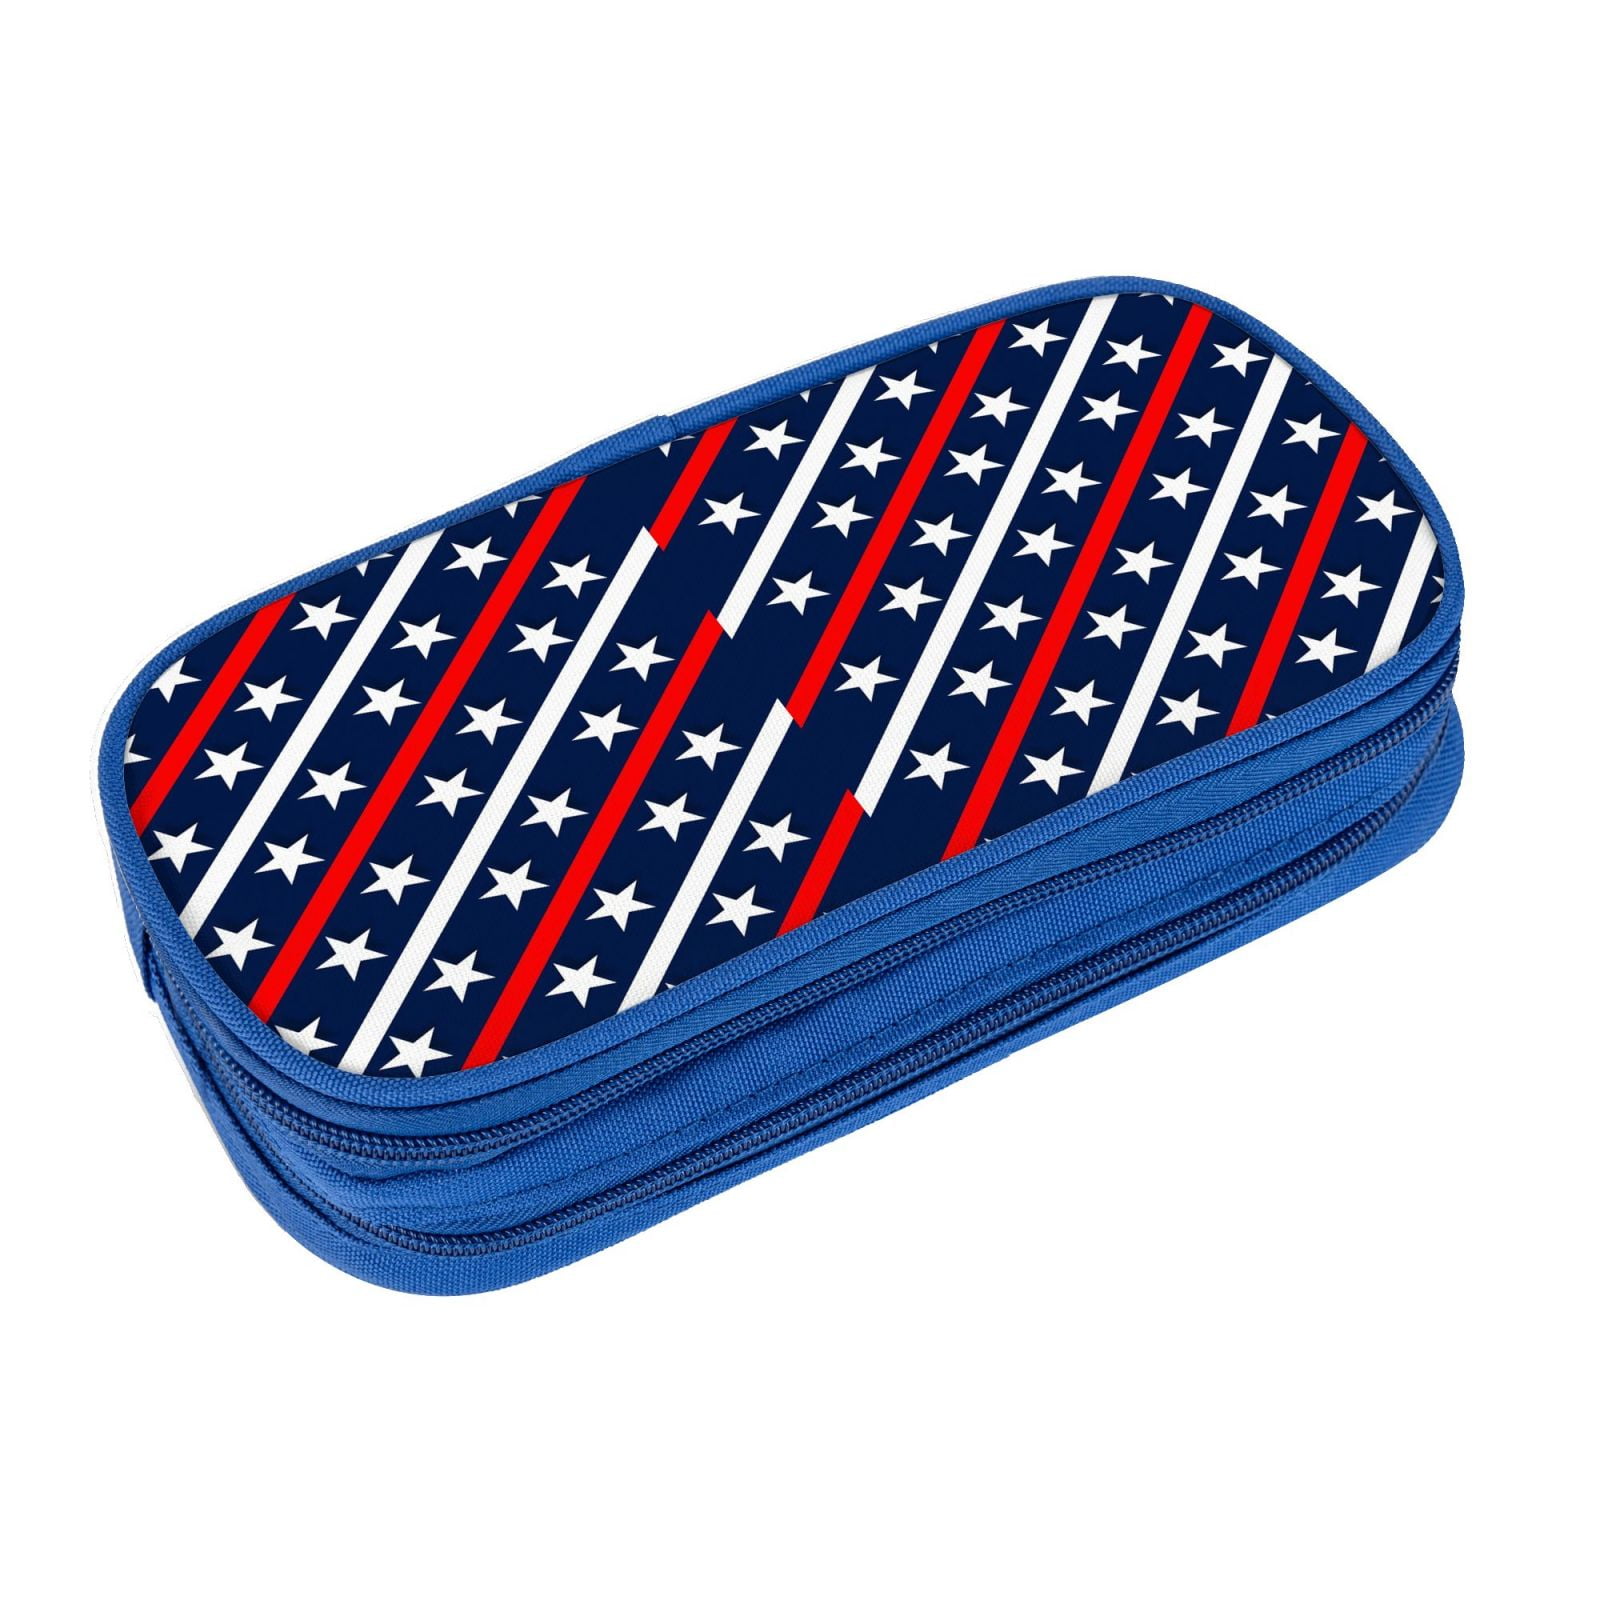 Blue Bags Pencil Patriotic Zipper Portable Case, Blue Strips Stars White Capacity with XMXY Red Large Compartments Pencil